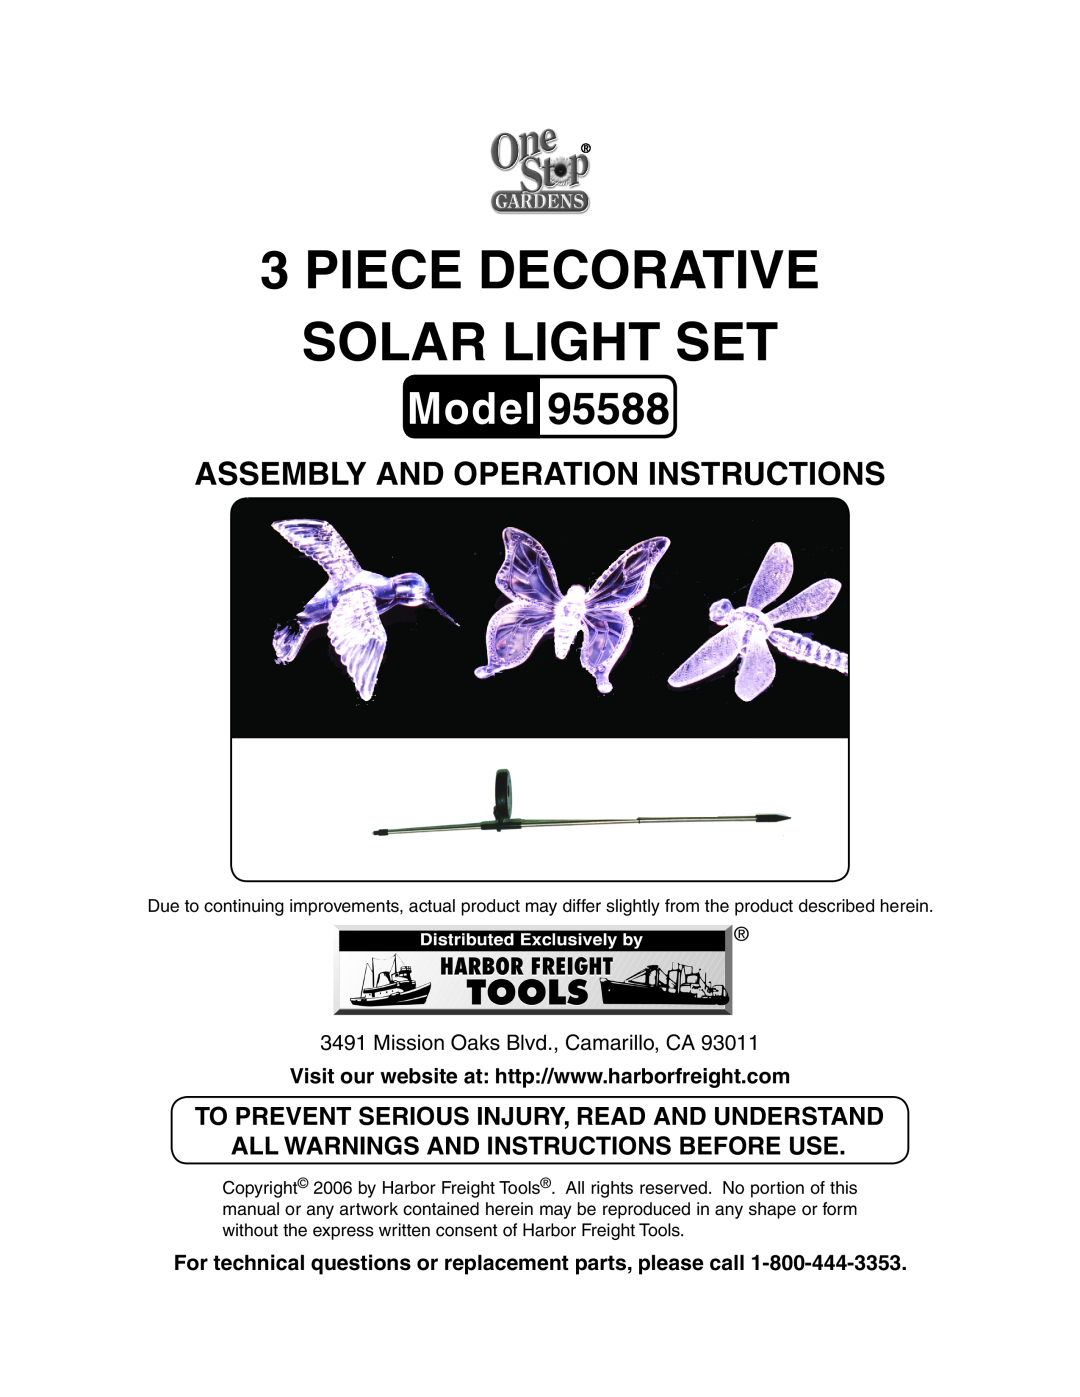 Harbor Freight Tools 3 Piece decorative solar light set manual To prevent serious injury, read and understand, Model 